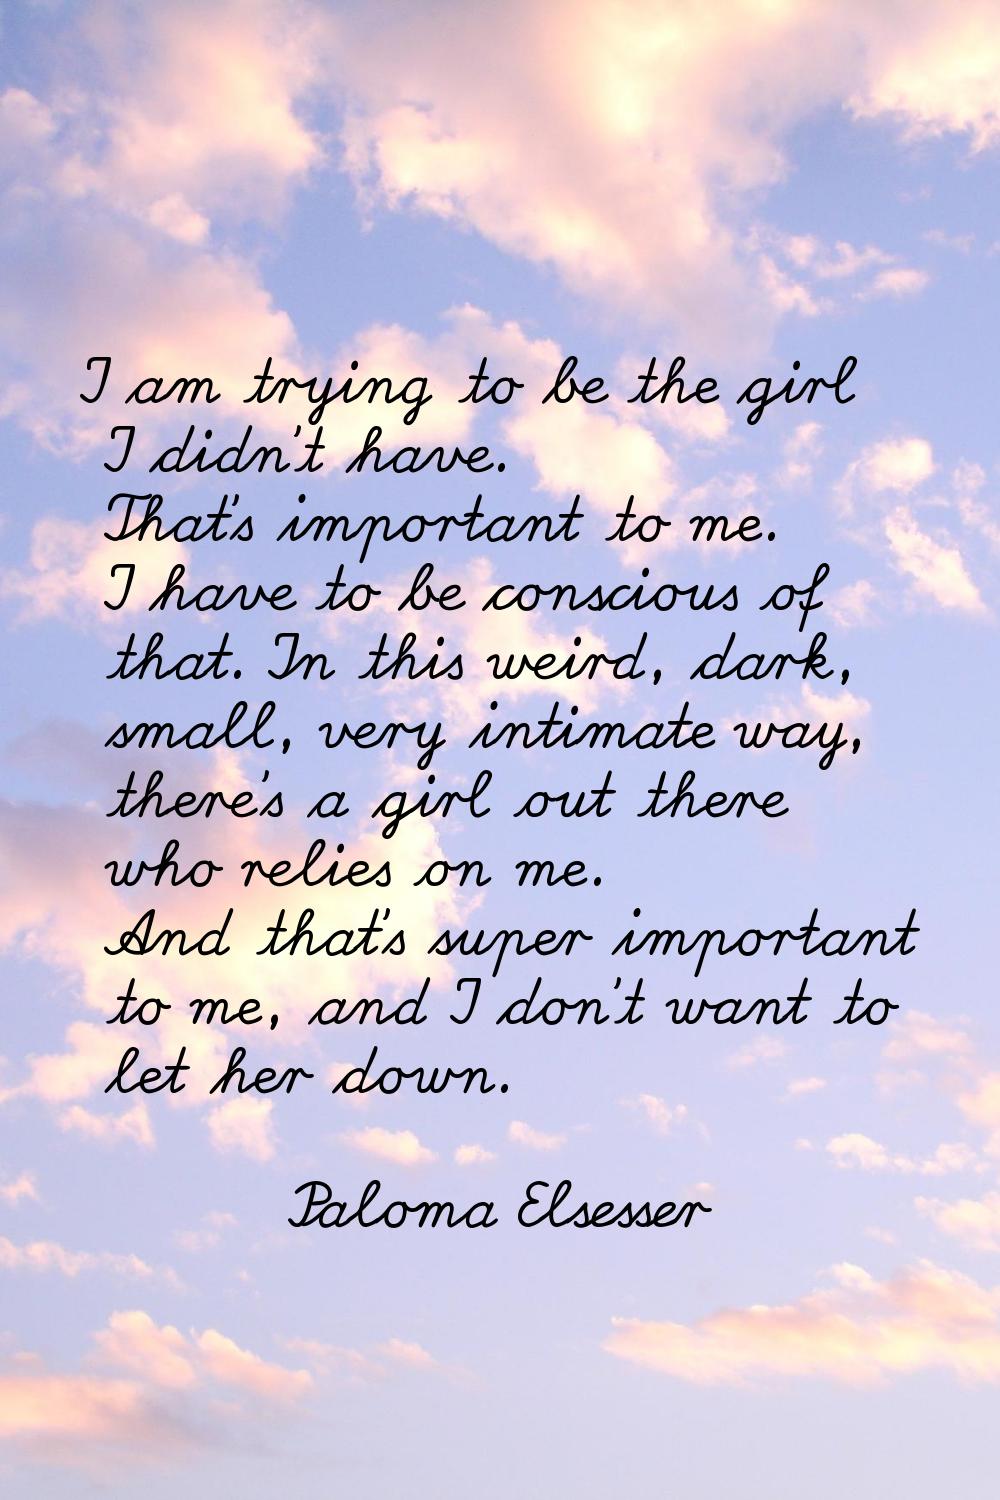 I am trying to be the girl I didn't have. That's important to me. I have to be conscious of that. I